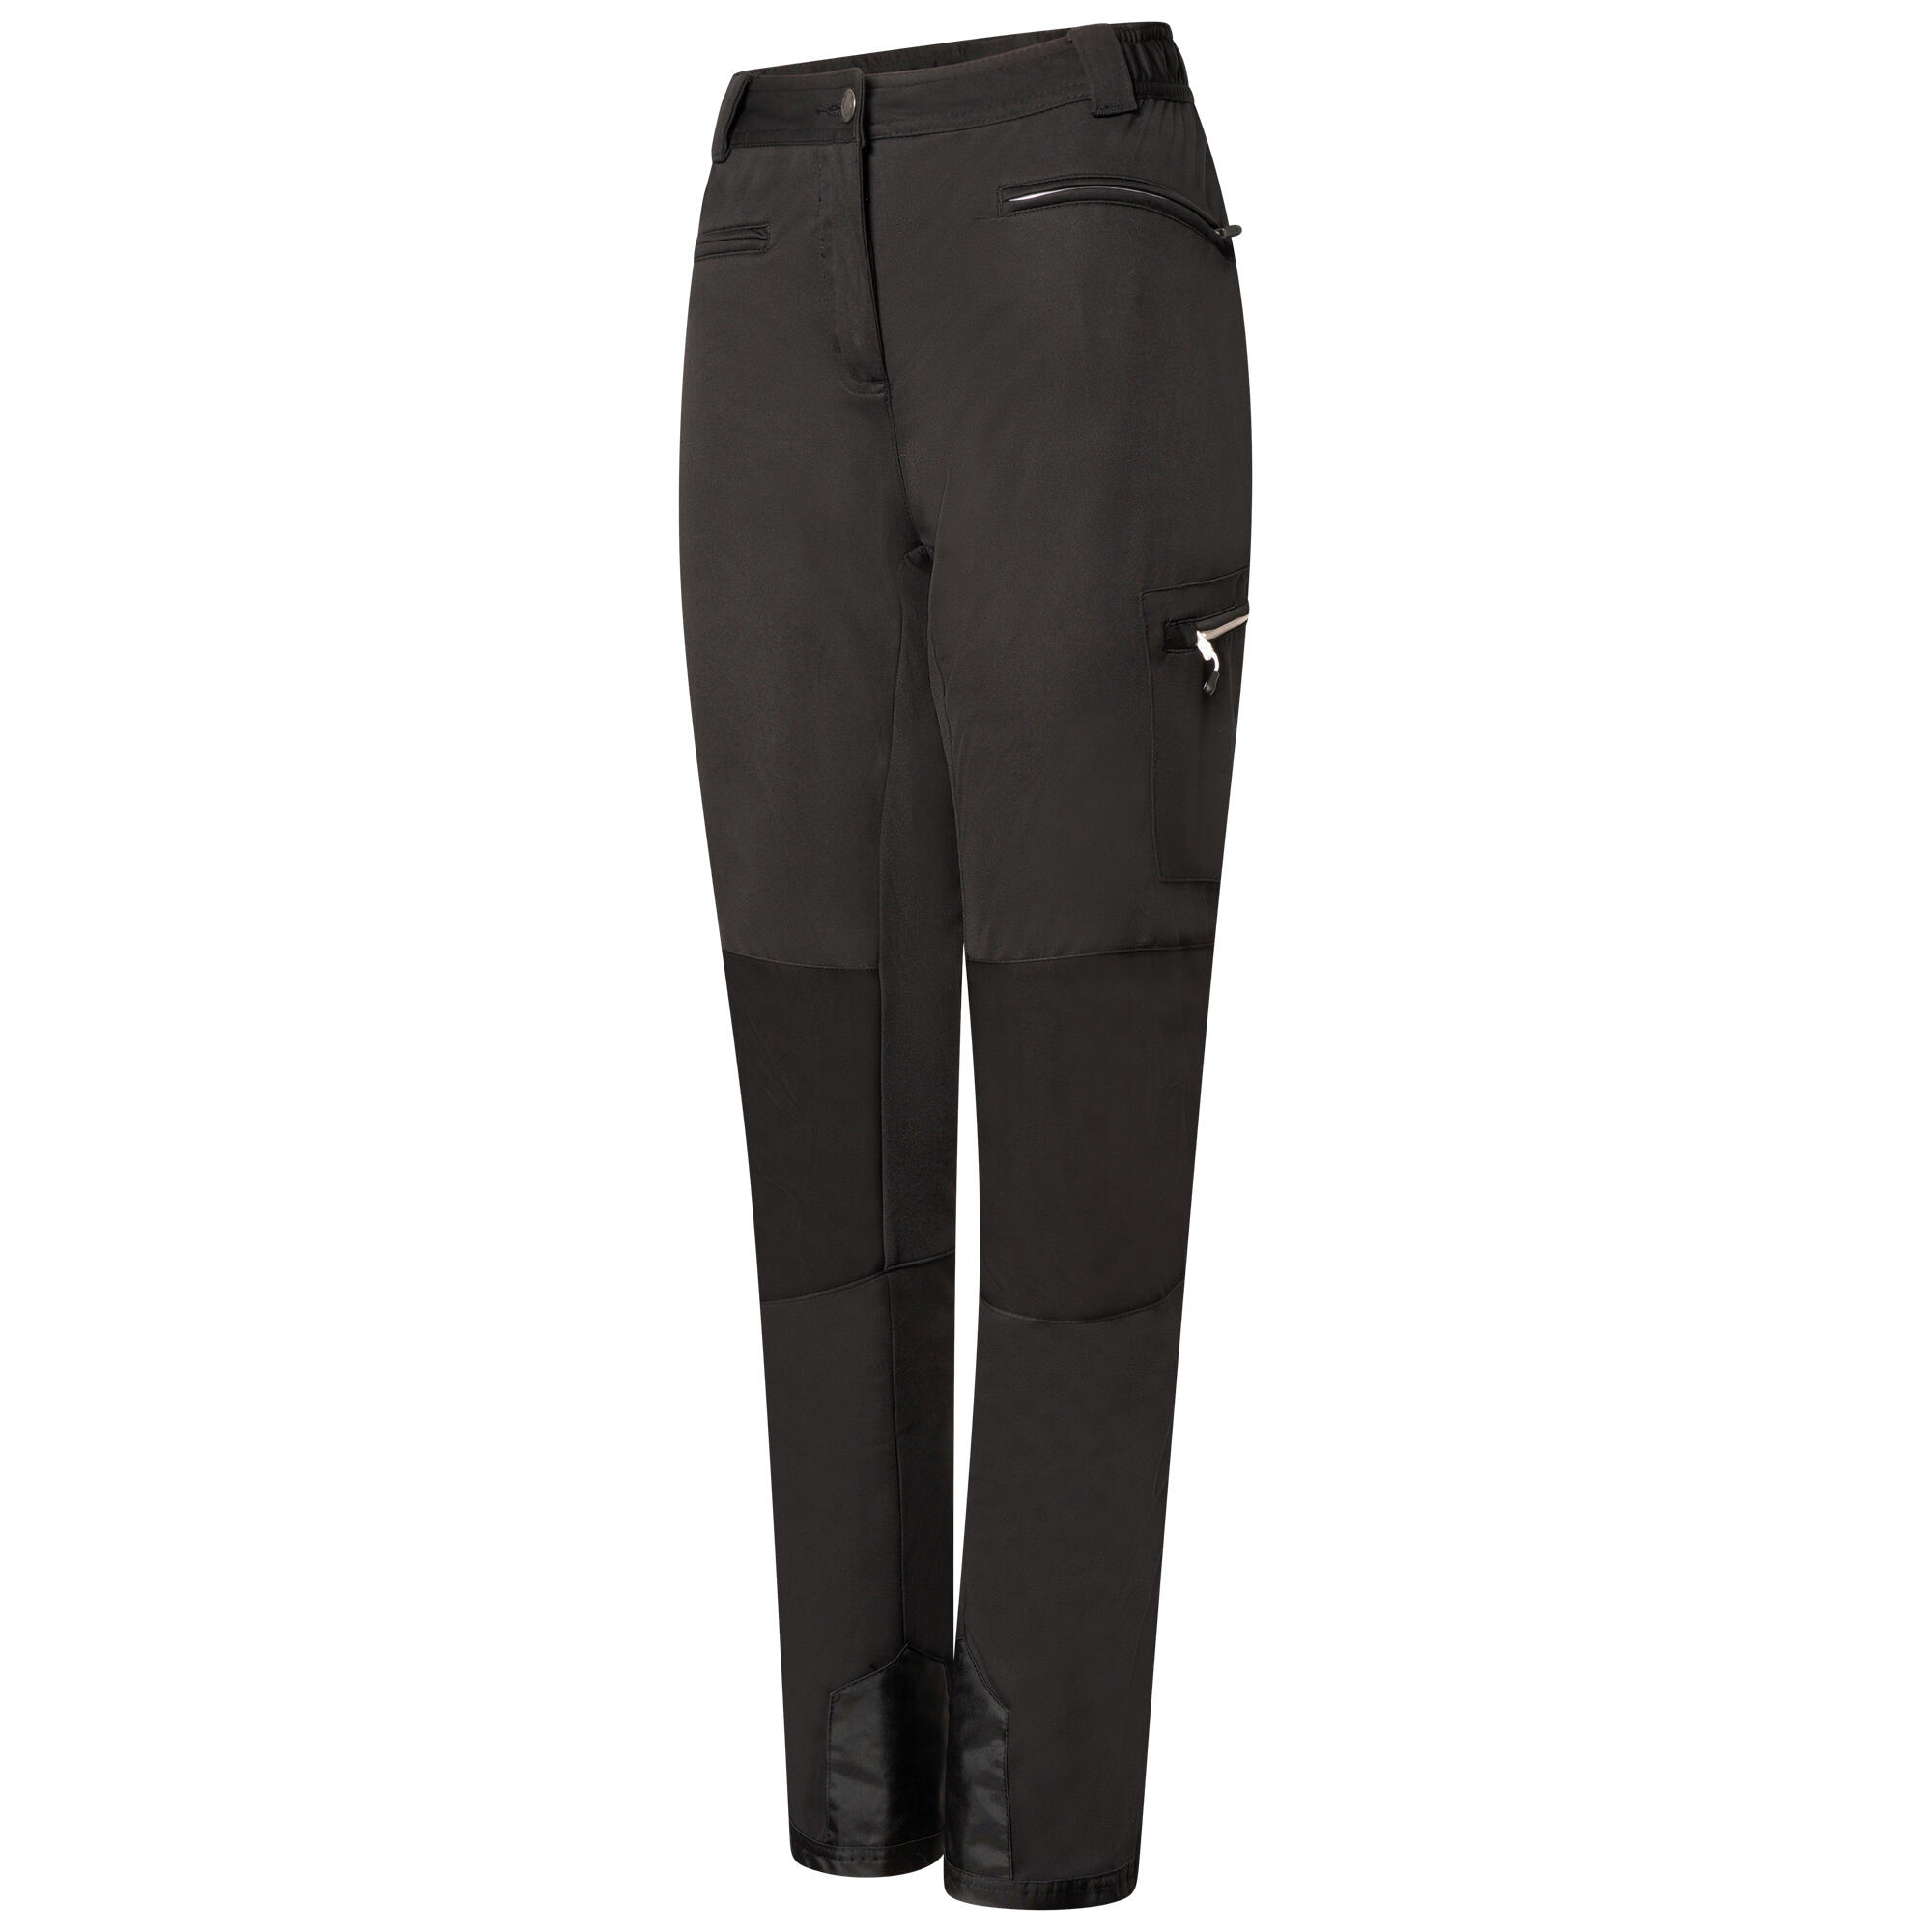 Appended II Women's Hiking Trousers - Black 2/7